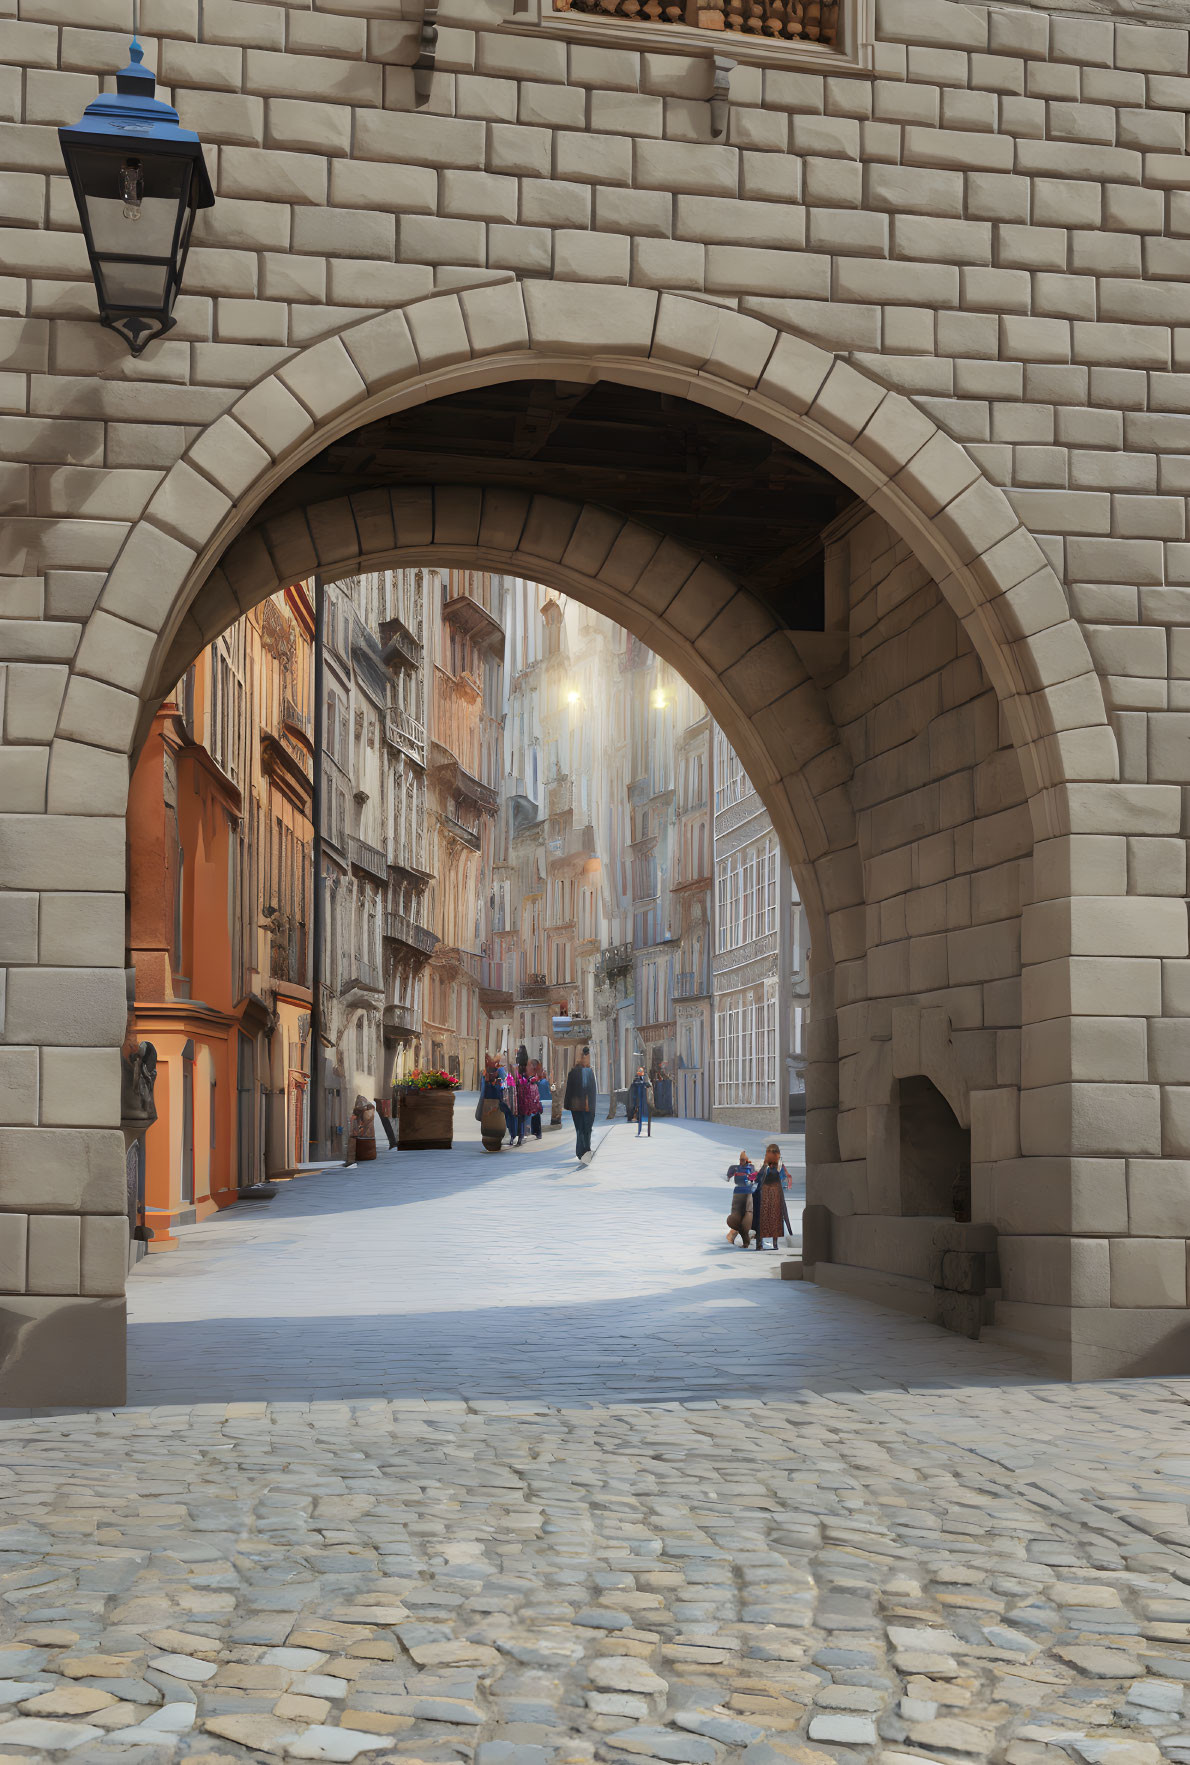 Stone Archway Over Cobblestone Street and Old Buildings with Pedestrians, Lanterns, and